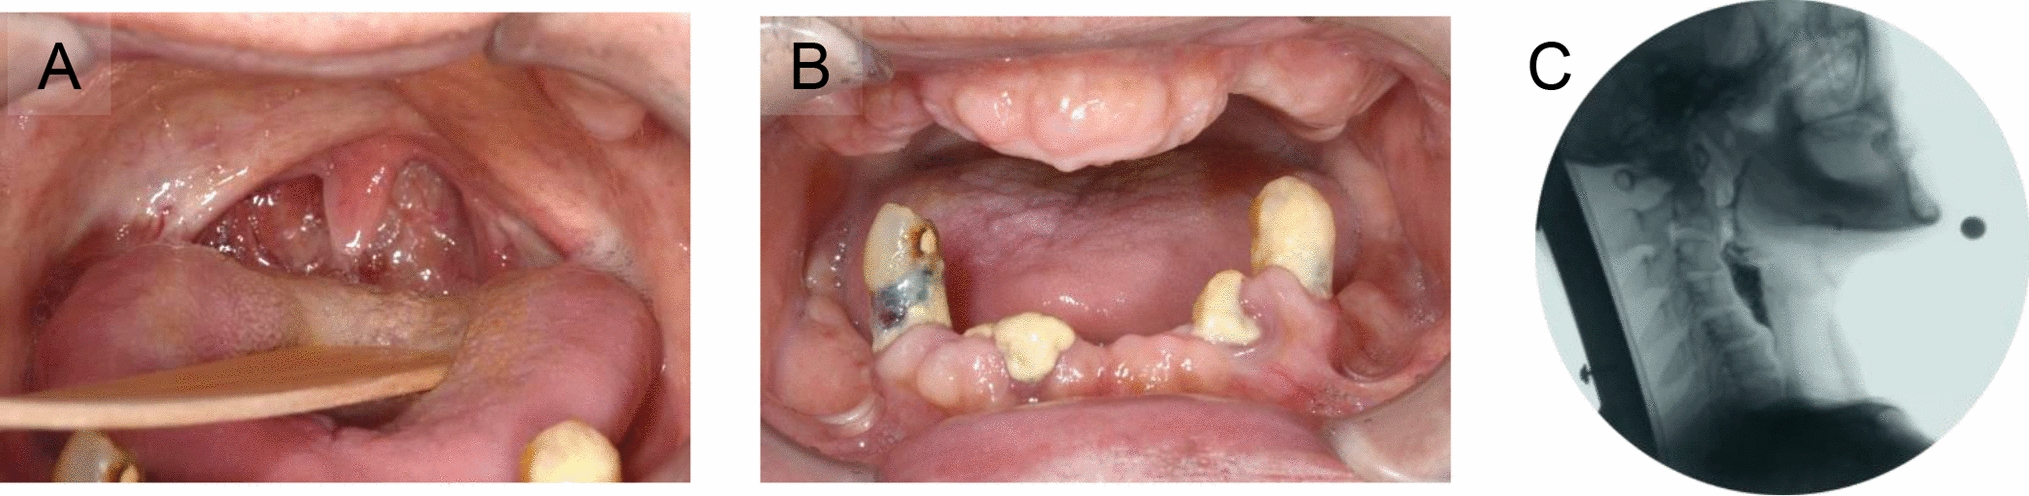 A Case of Dysphagia Rehabilitation in a Patient in the Chronic Stage of Lateral Medullary Syndrome